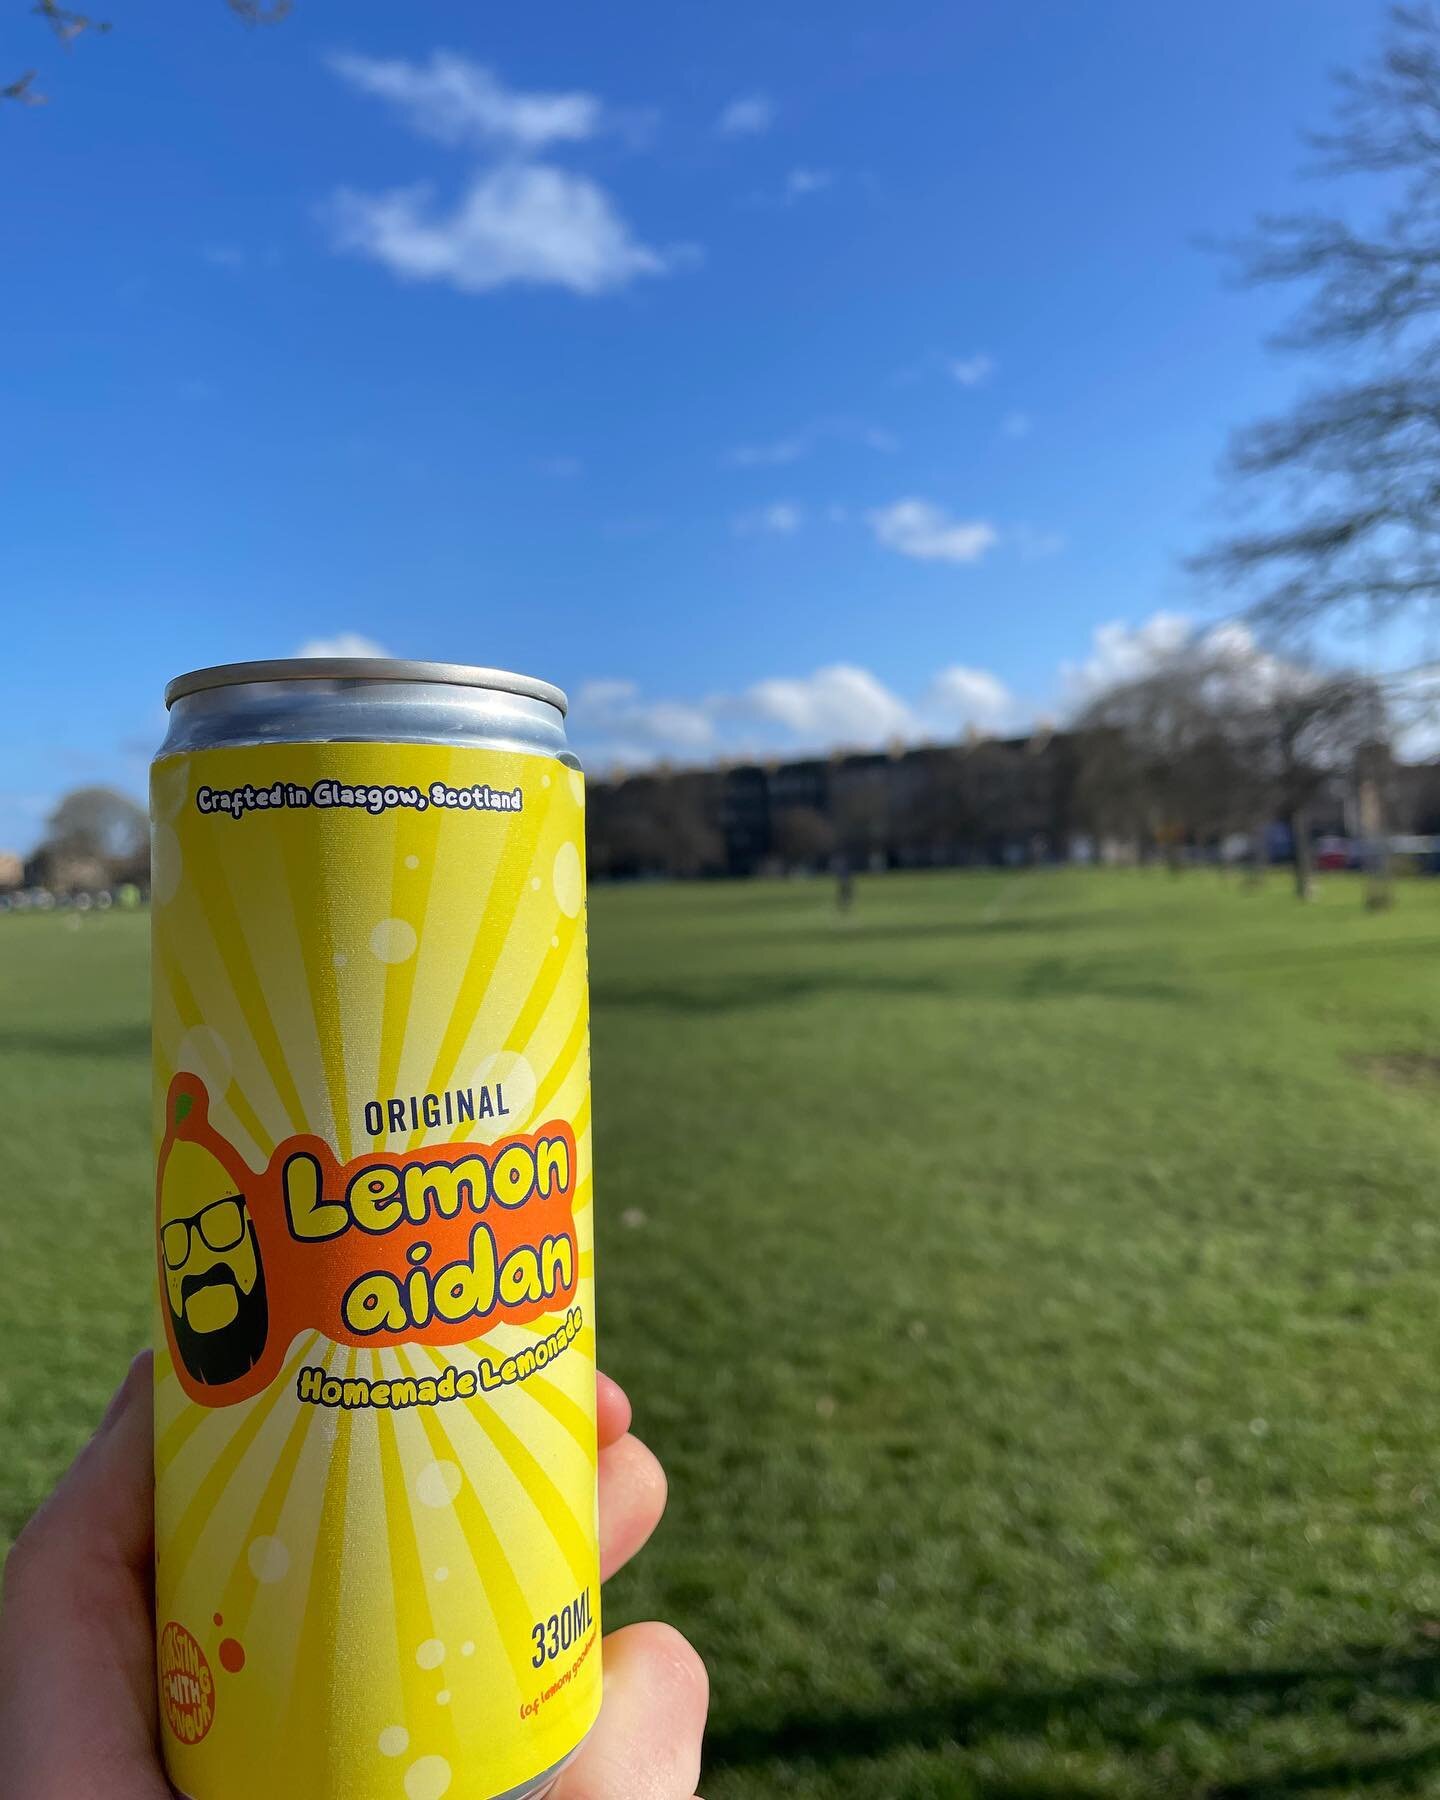 🍋Edinburgh 🍋

Uh oh looks like someone let the juice loose over in the east coast

You can now get your fill of Lemonaidan at @the_pastrysection  and @cheesentoasted